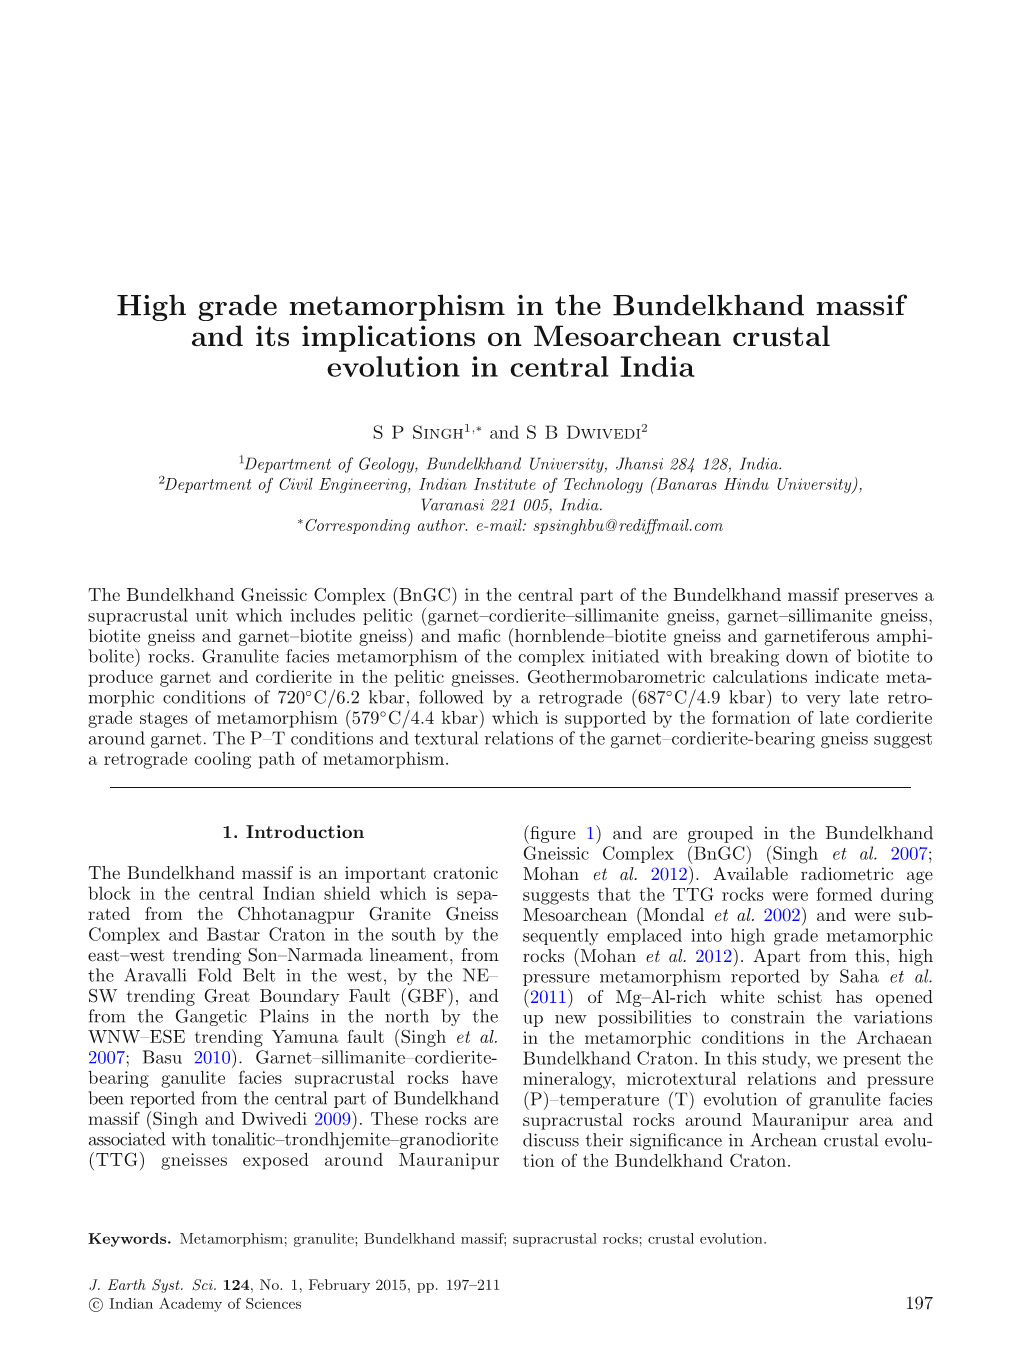 High Grade Metamorphism in the Bundelkhand Massif and Its Implications on Mesoarchean Crustal Evolution in Central India